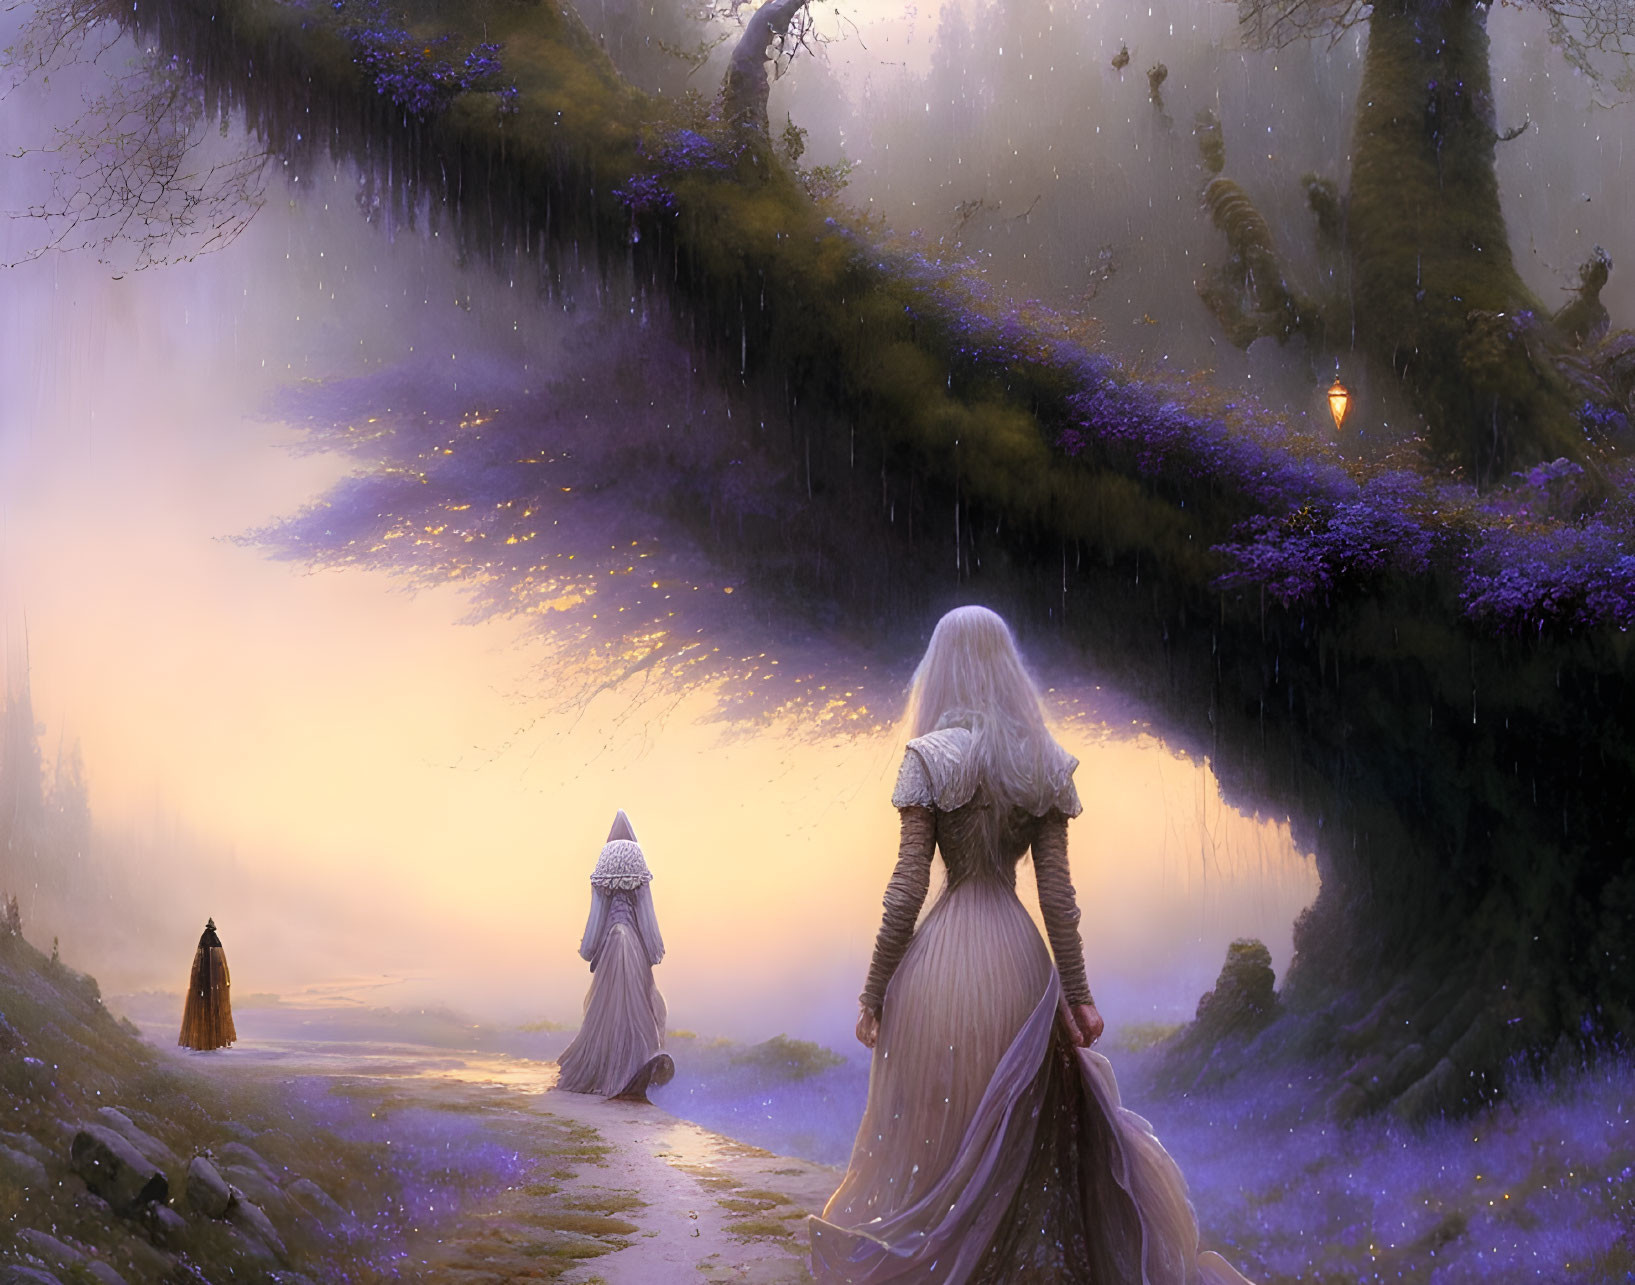 Three individuals in fantasy clothing explore mystical forest with purple foliage and hanging lanterns